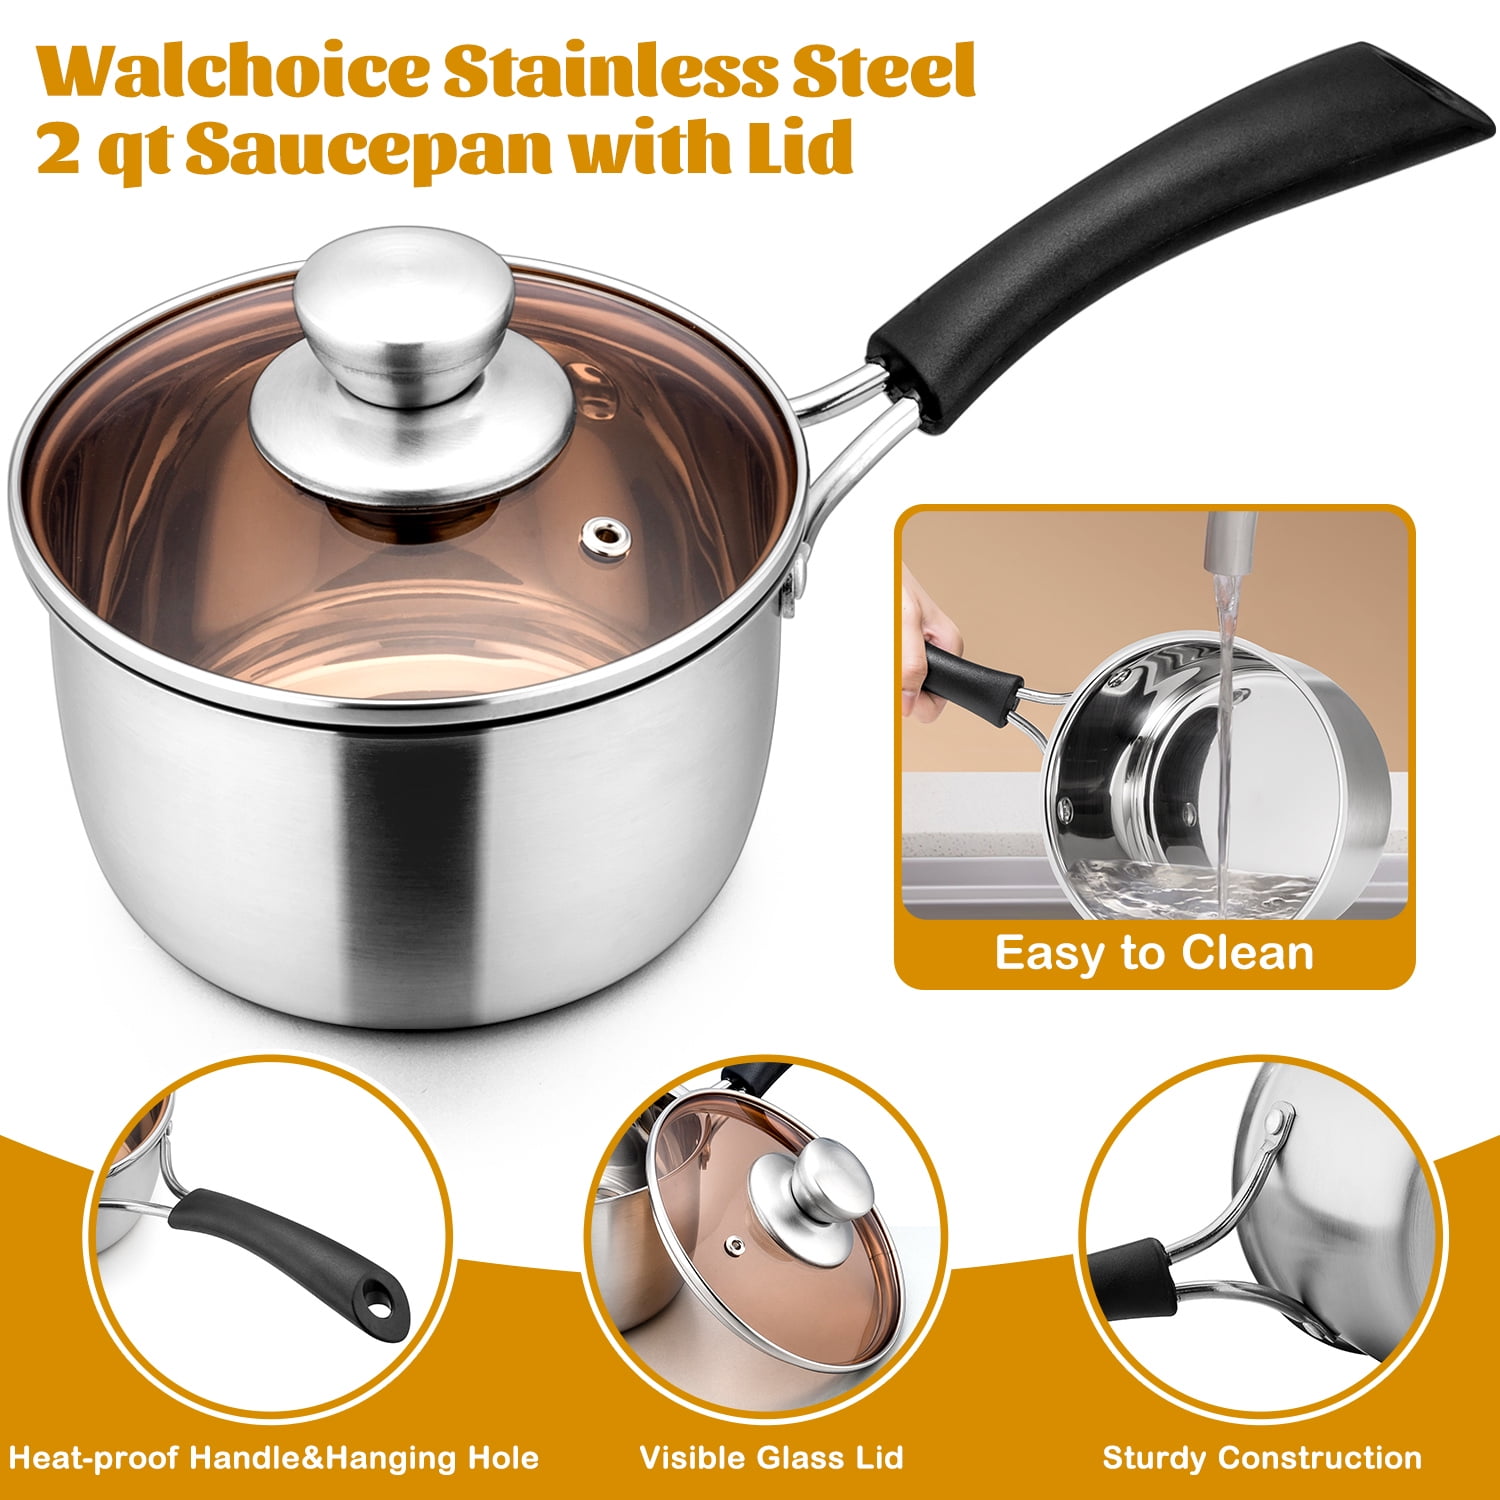 18/8 Stainless Steel Saucepan with Lid, 2.5 Quart Nonstick Sauce Pan, Small  Pots for Cooking, Dishwasher Safe, Gold